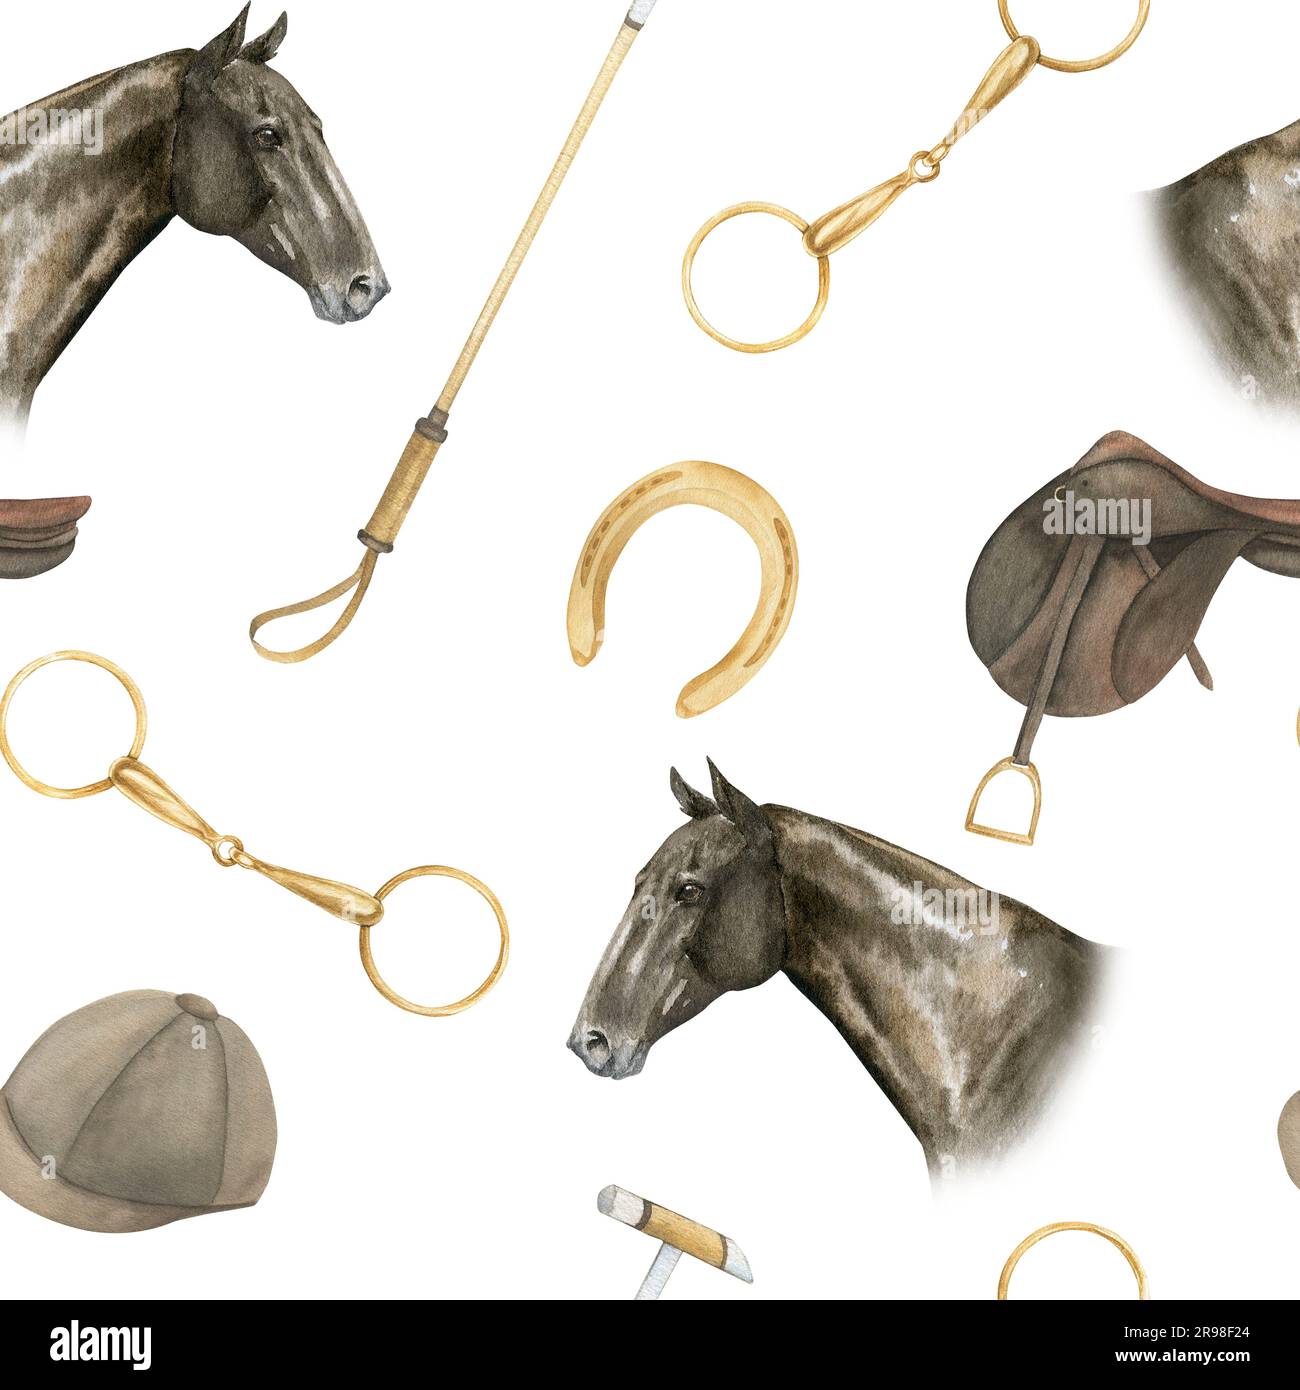 Seamless minimalistic pattern with watercolor illustrations of golden horseshoes and snaffles, saddles, horse polo sticks , horse portrairs, isolated Stock Photo